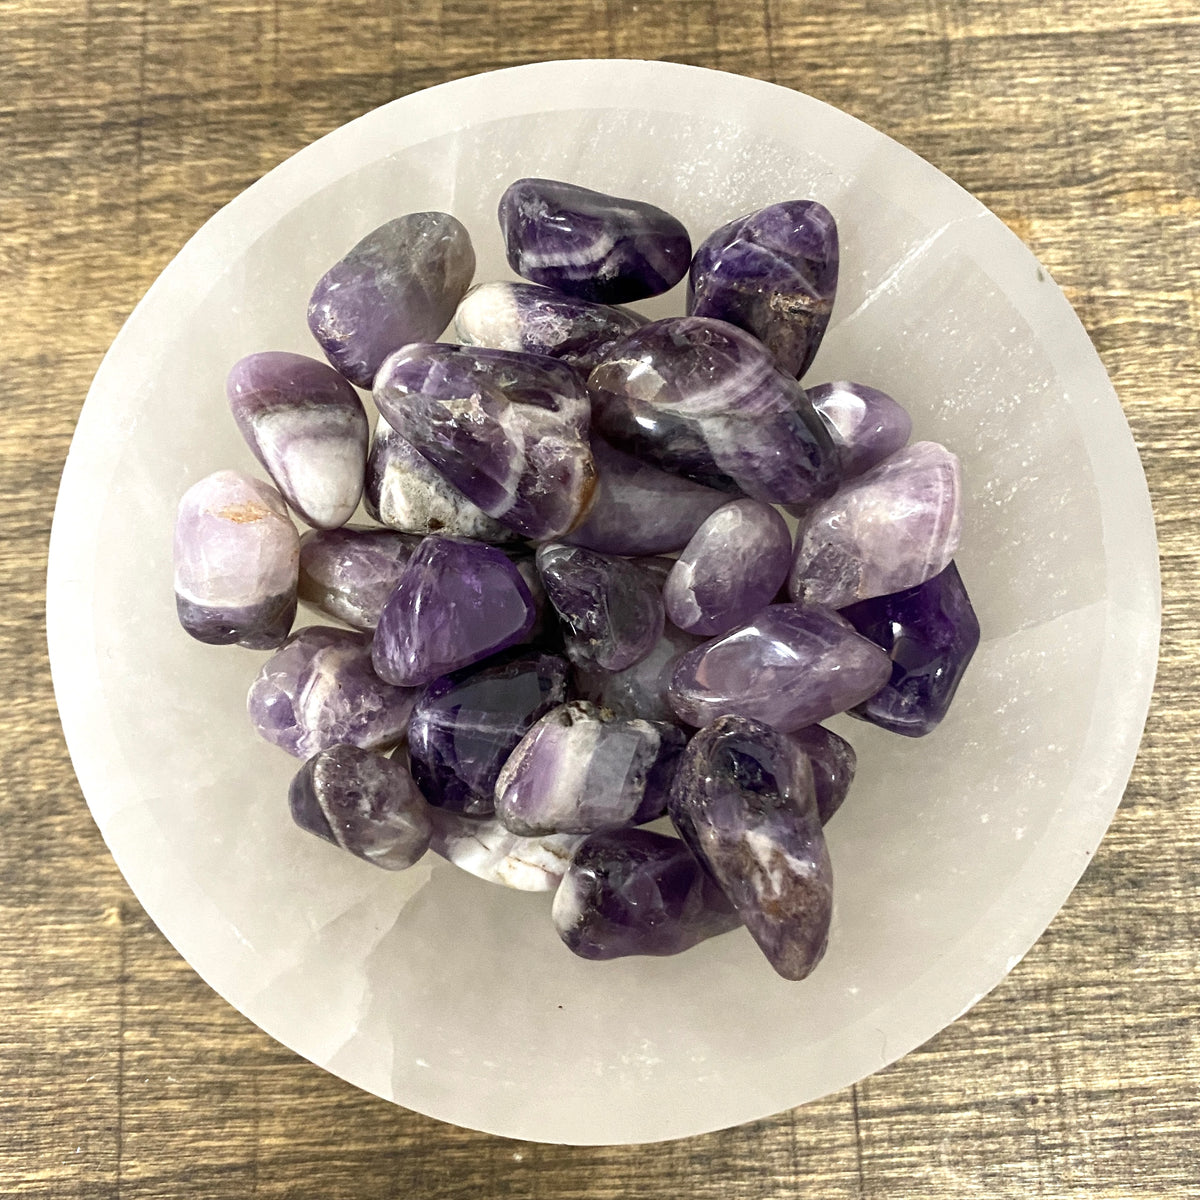 Overhead shot of various Chevron Amethyst tumbled stones in a small bowl.